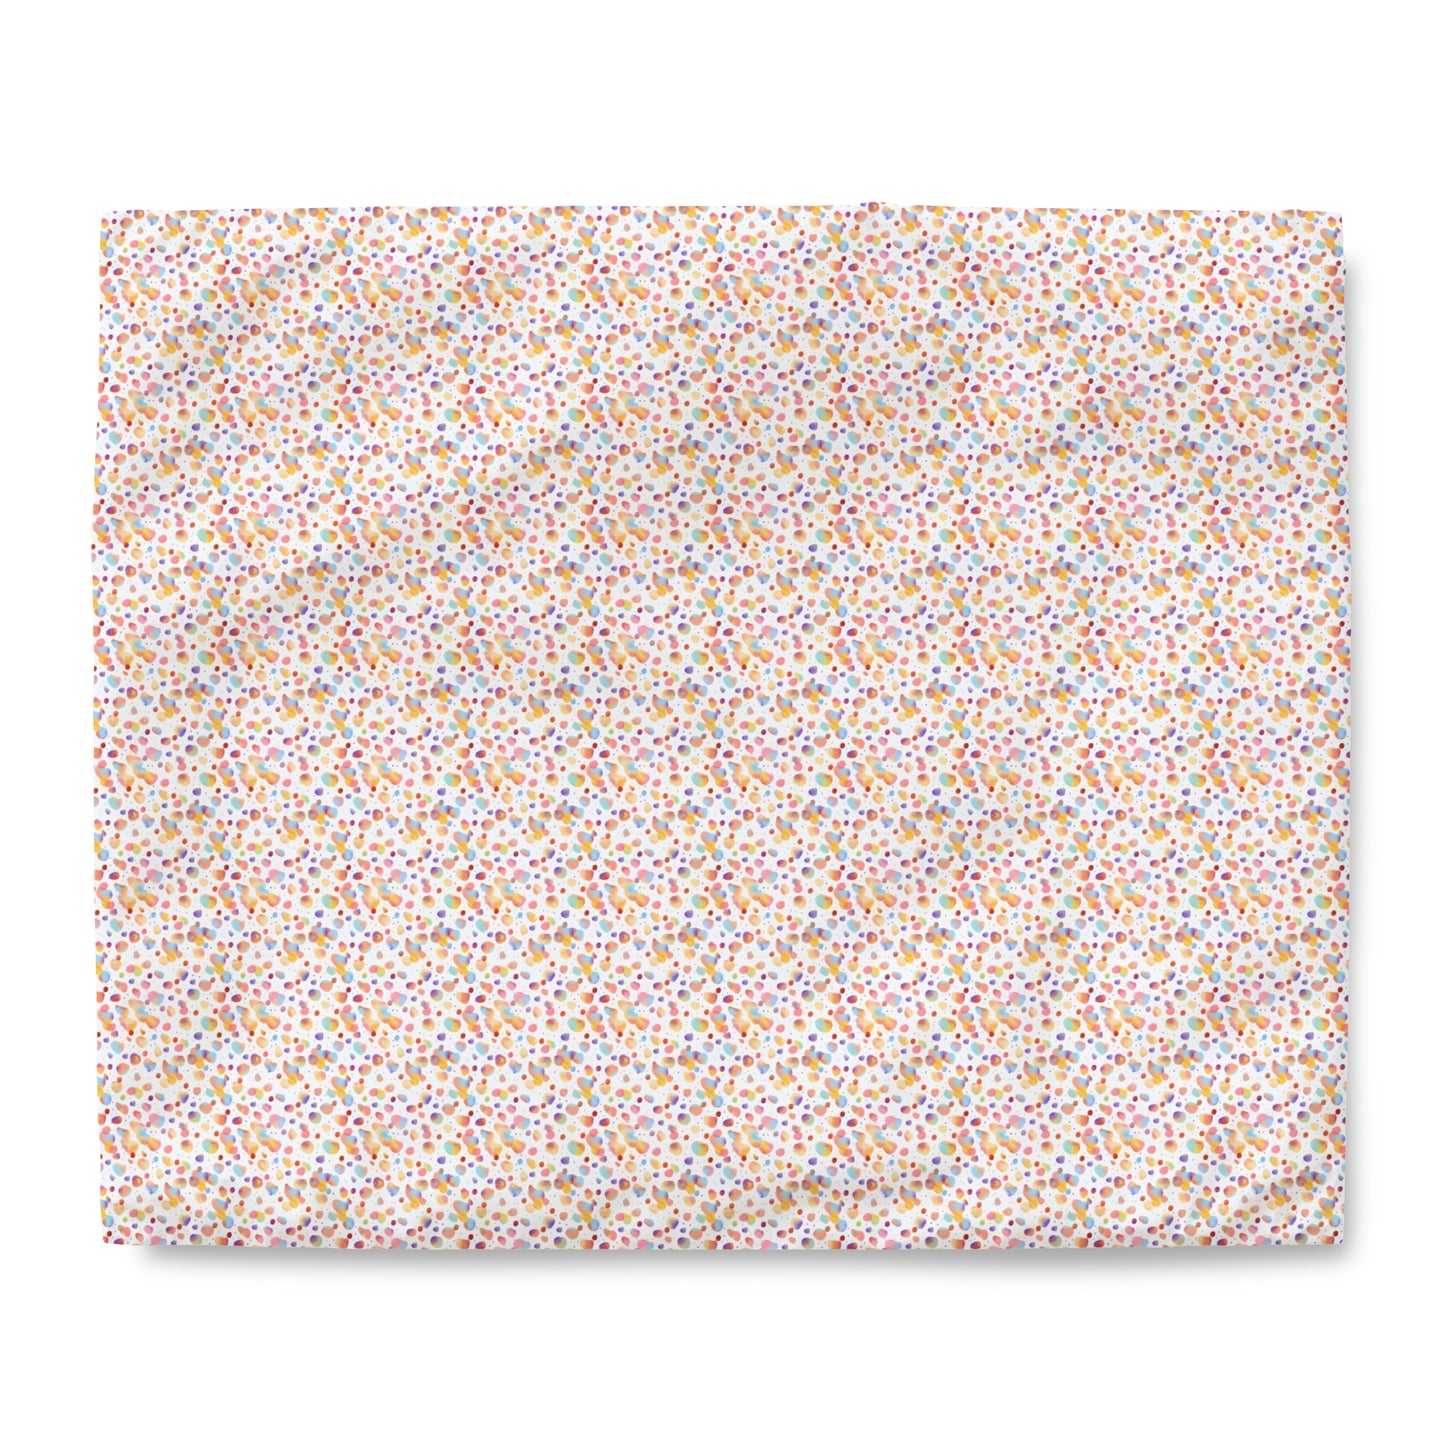 Niccie's Pastel Abstract Pattern Duvet Cover Bedding for a Stylish Bedroom